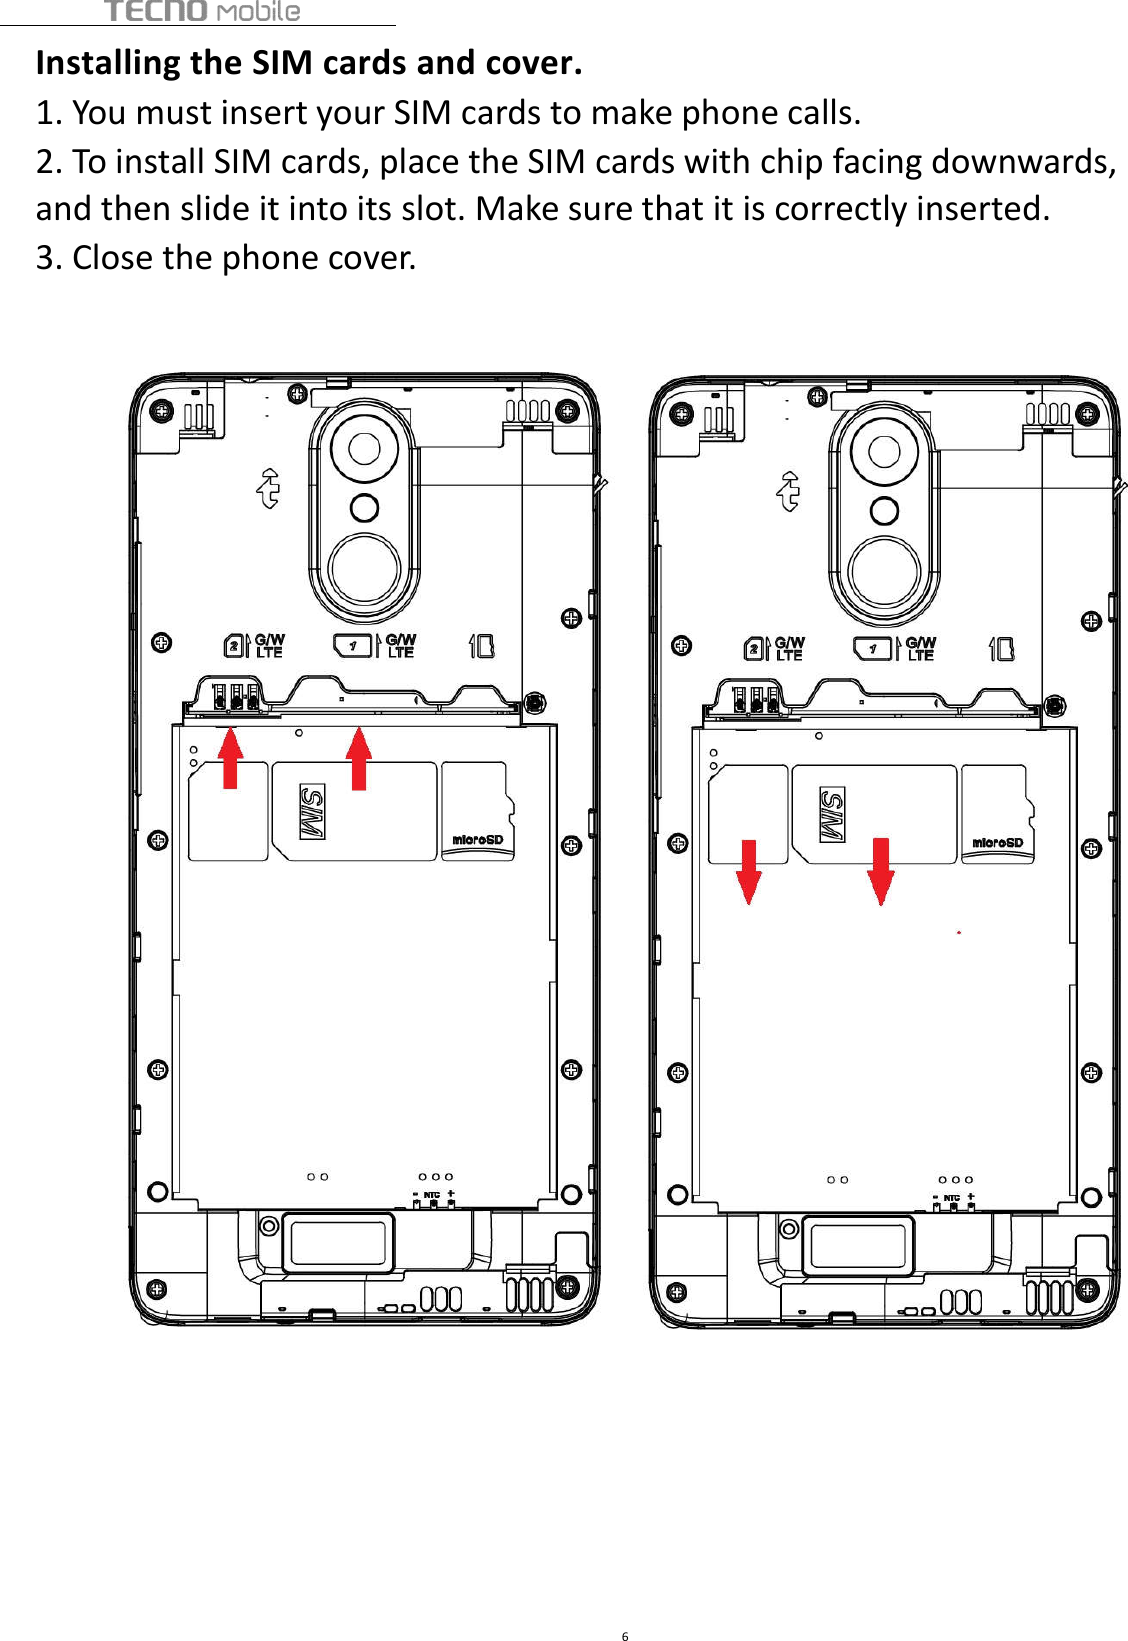 6Installing the SIM cards and cover.1. You must insert your SIM cards to make phone calls.2. To install SIM cards, place the SIM cards with chip facing downwards,and then slide it into its slot. Make sure that it is correctly inserted.3. Close the phone cover.